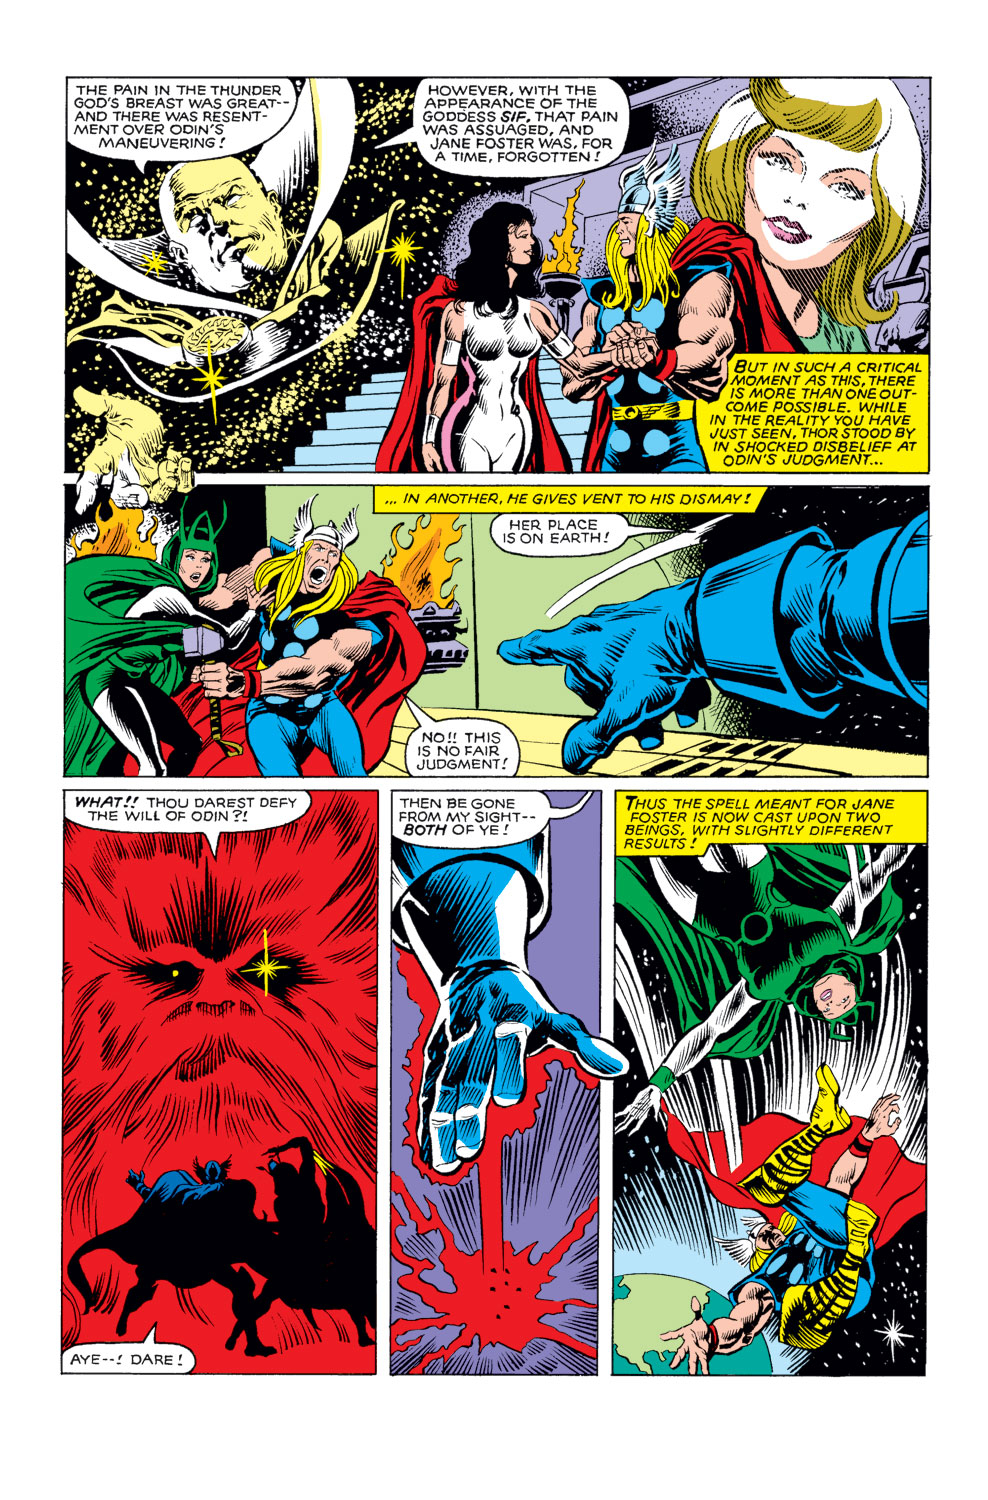 What If? (1977) Issue #25 - Thor and the Avengers battled the gods #25 - English 5